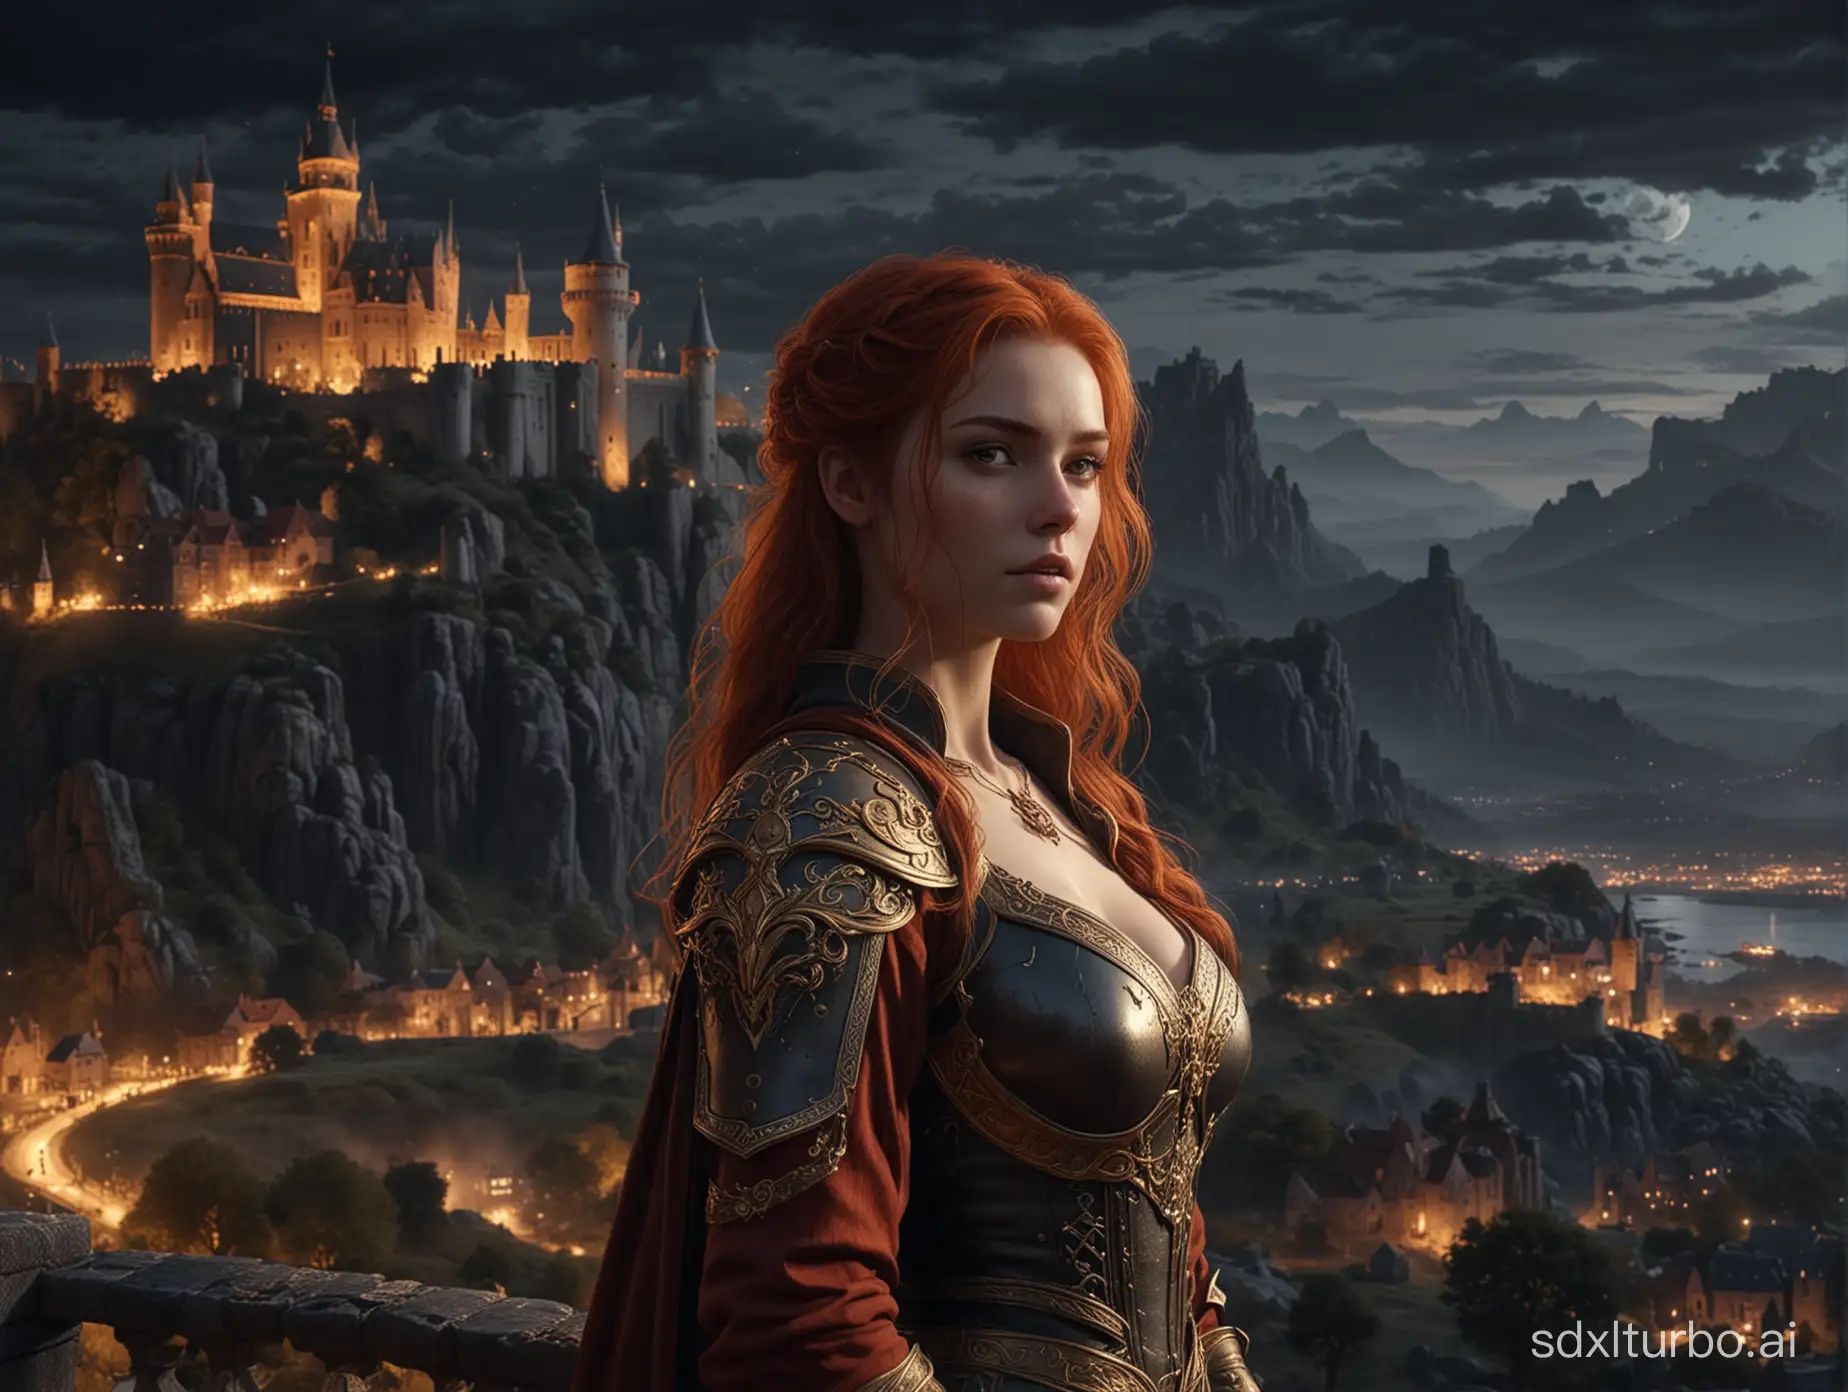 Epic-Elden-Ring-Night-Castle-Landscape-with-Female-Angle-Character